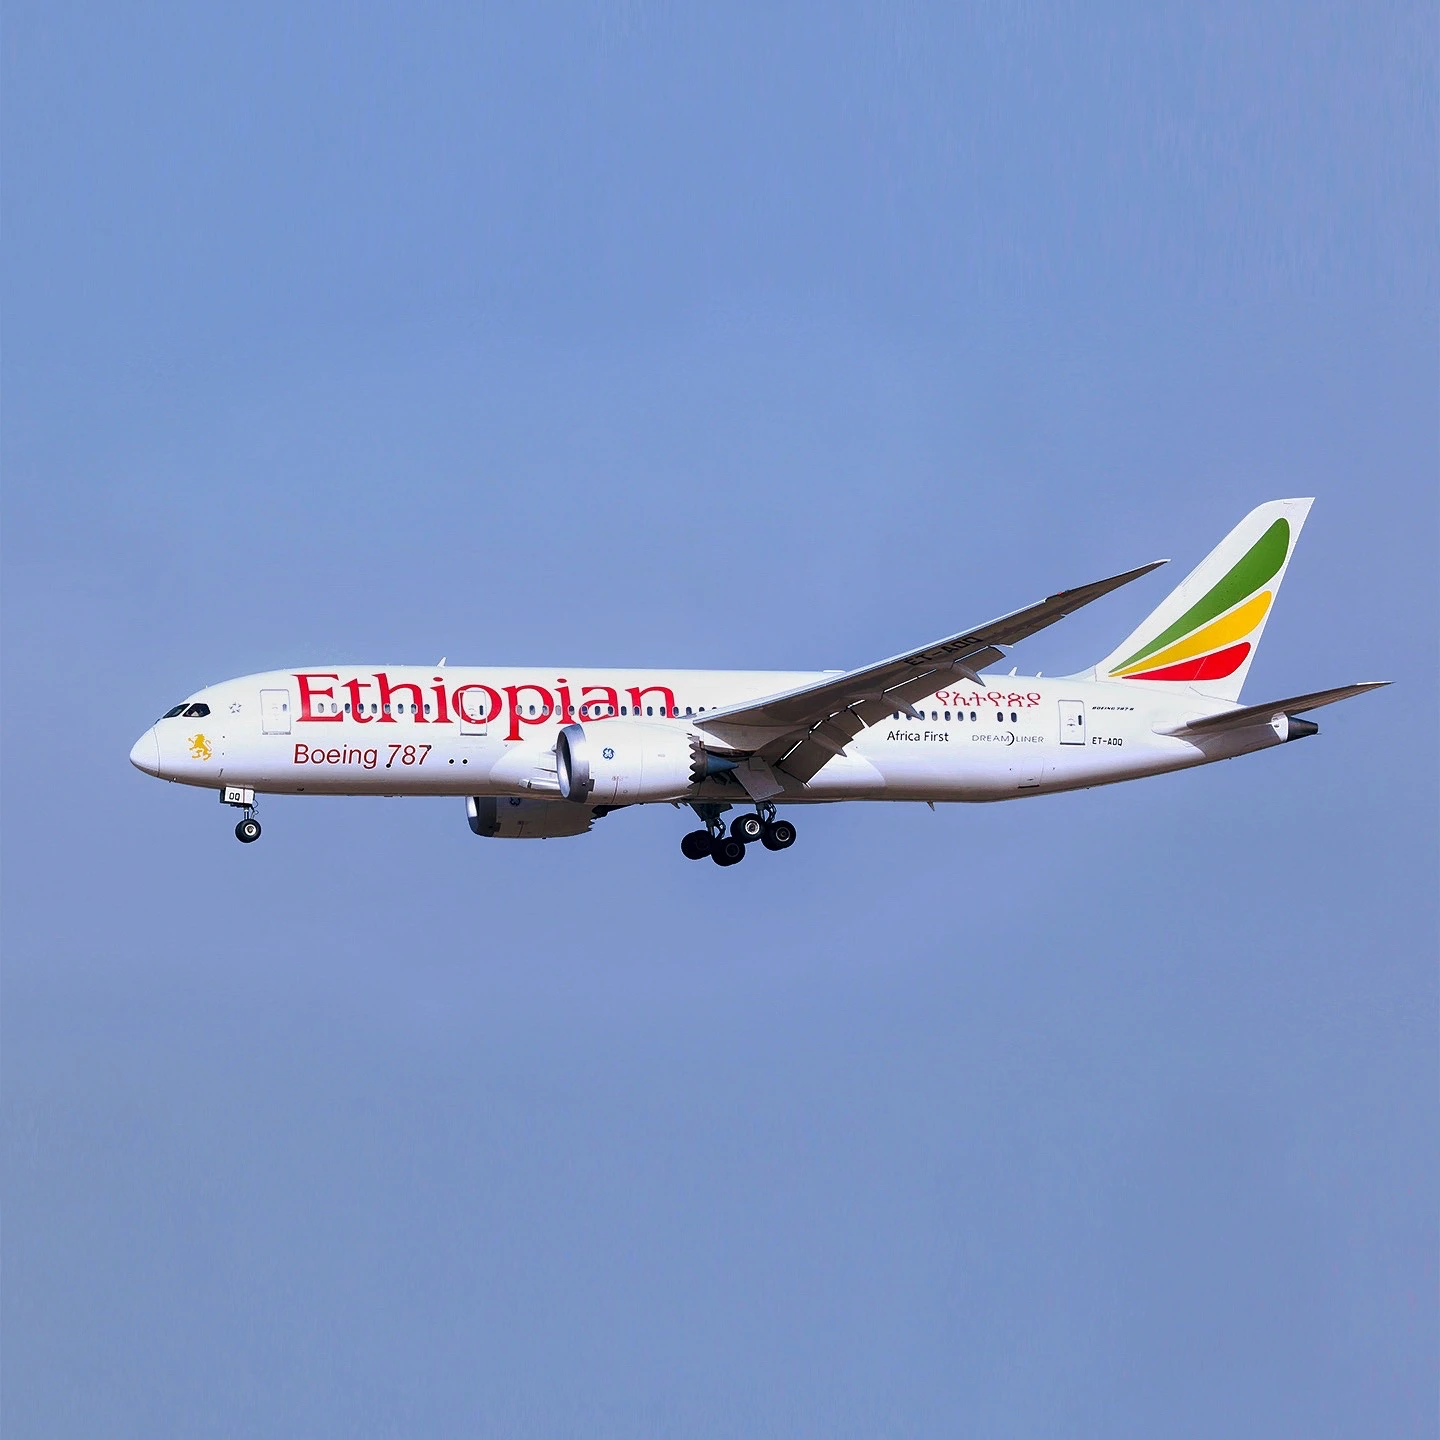 Ethiopian Airlines announce a new route to Addis Ababa